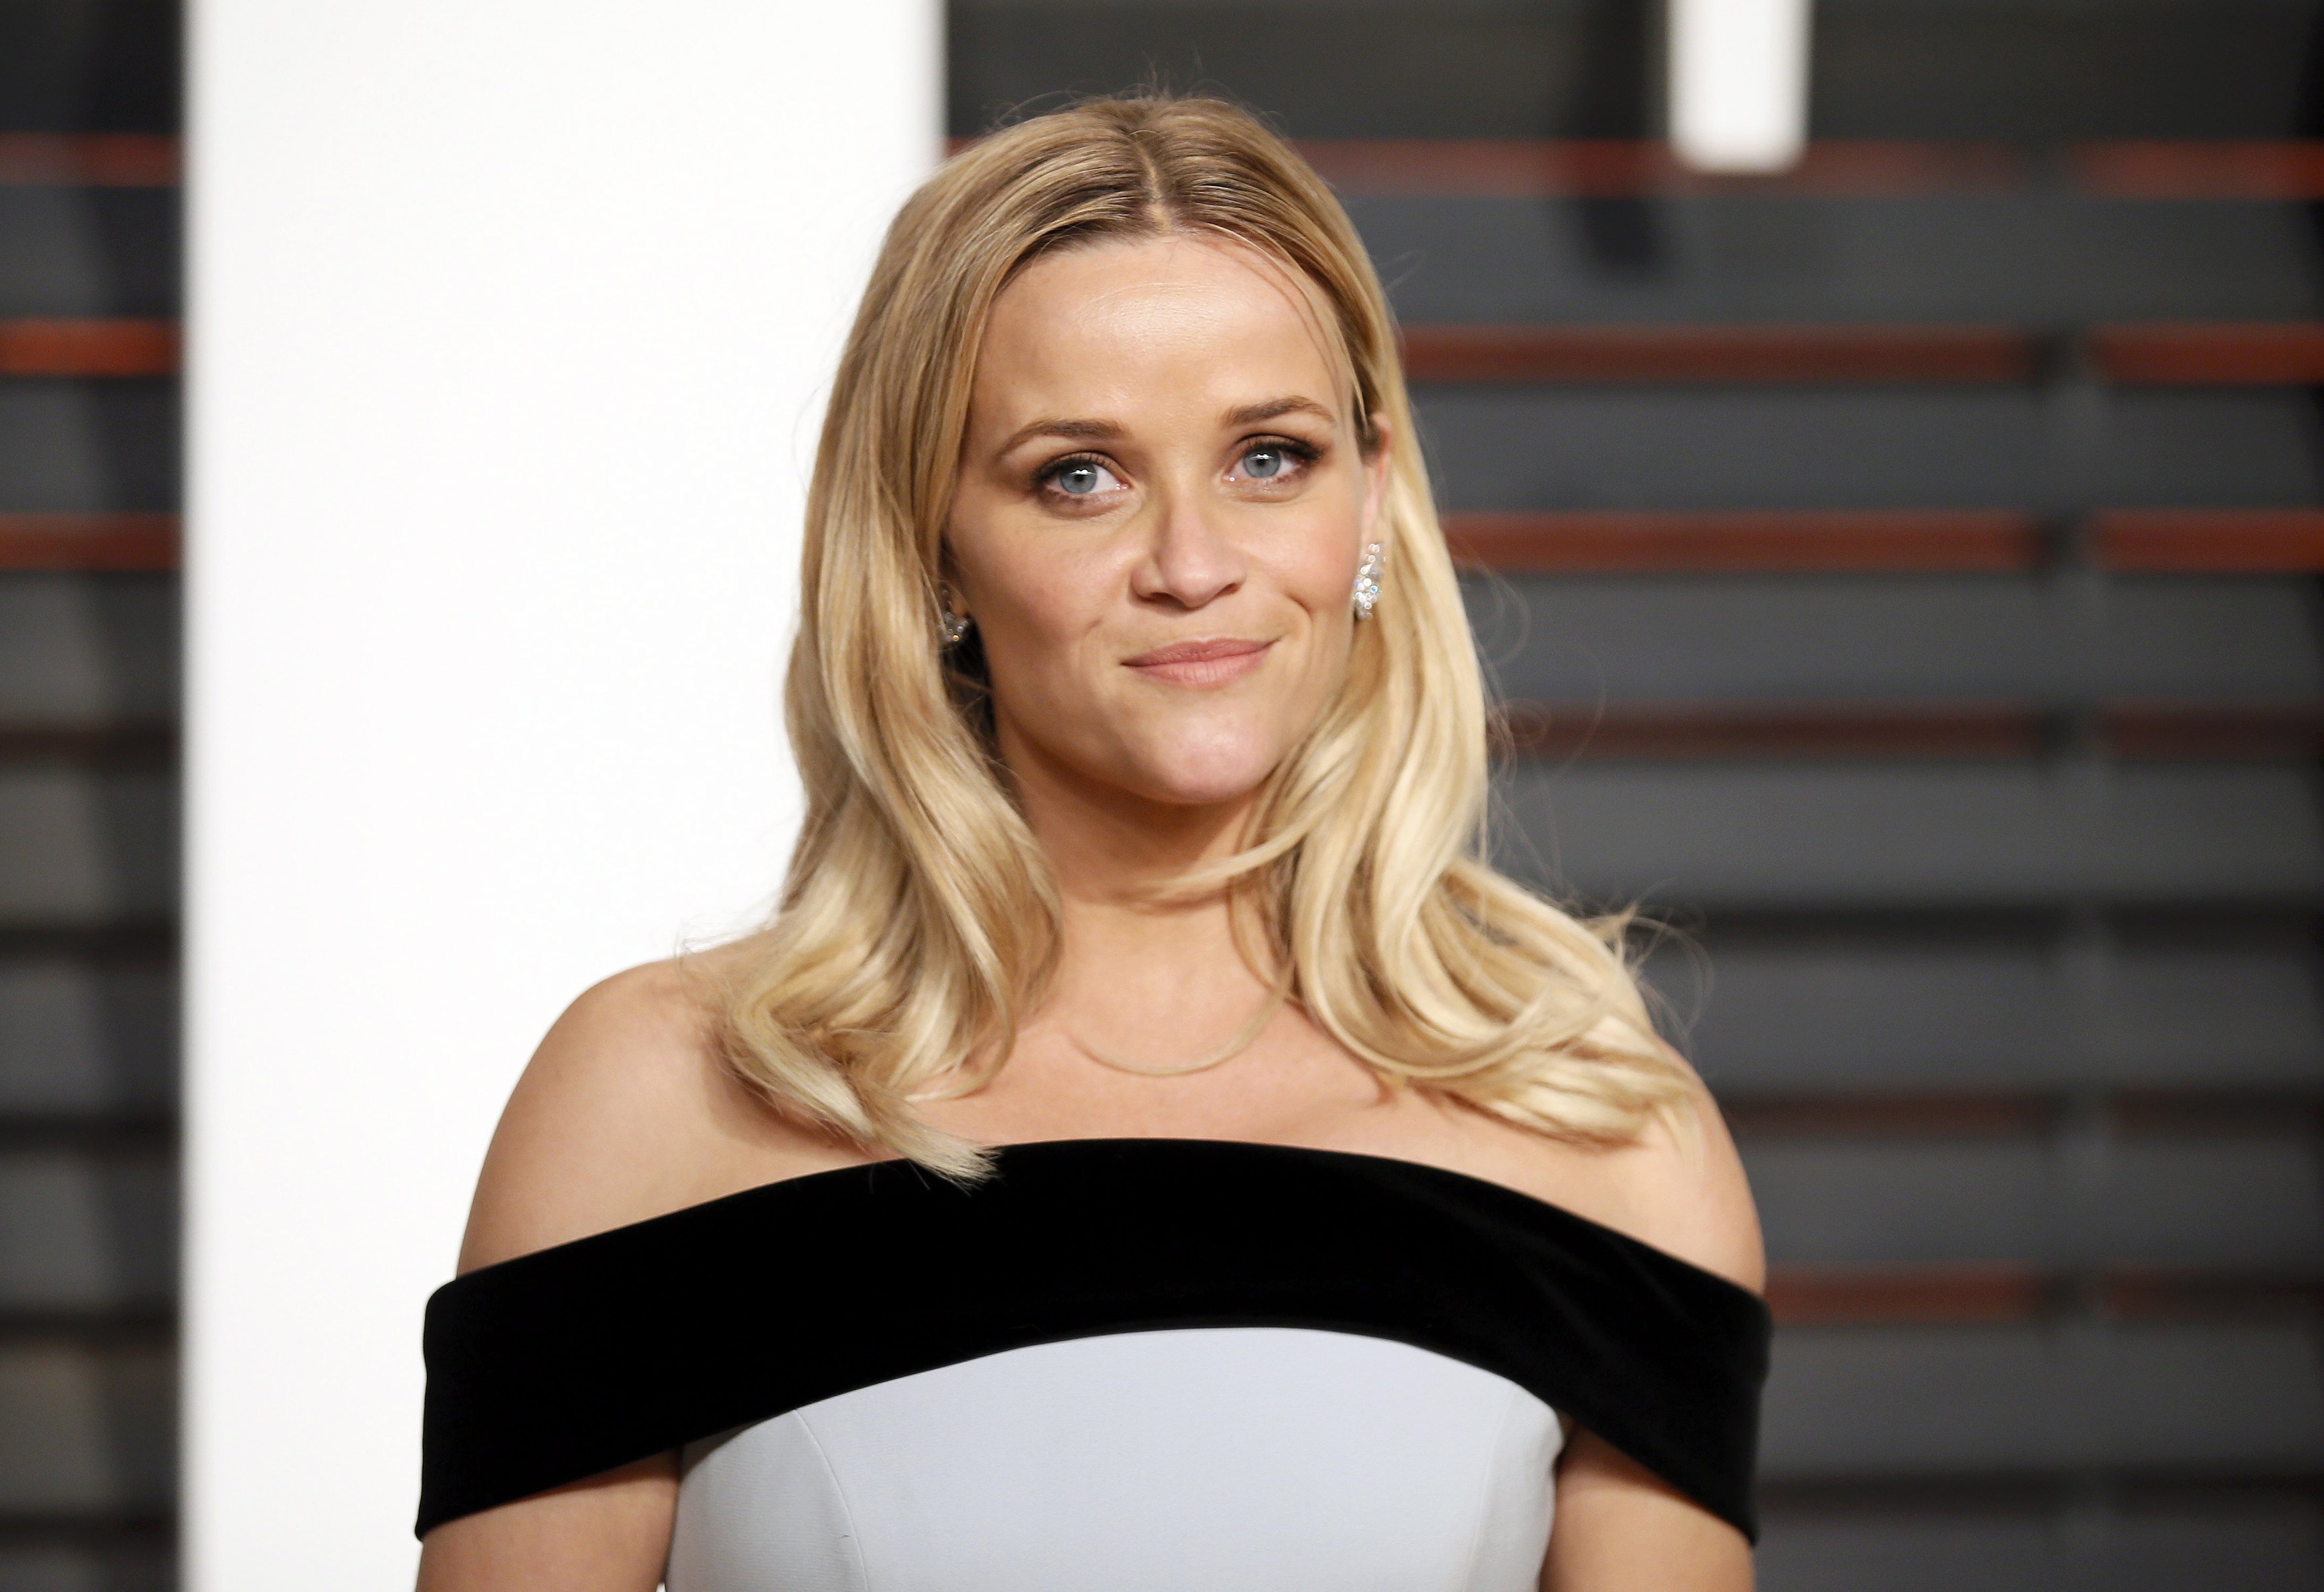 Actress Reese Witherspoon arrives at the 2015 Vanity Fair Oscar Party in Beverly Hills on Feb. 22, 2015. (Danny Moloshoko—Reuters)